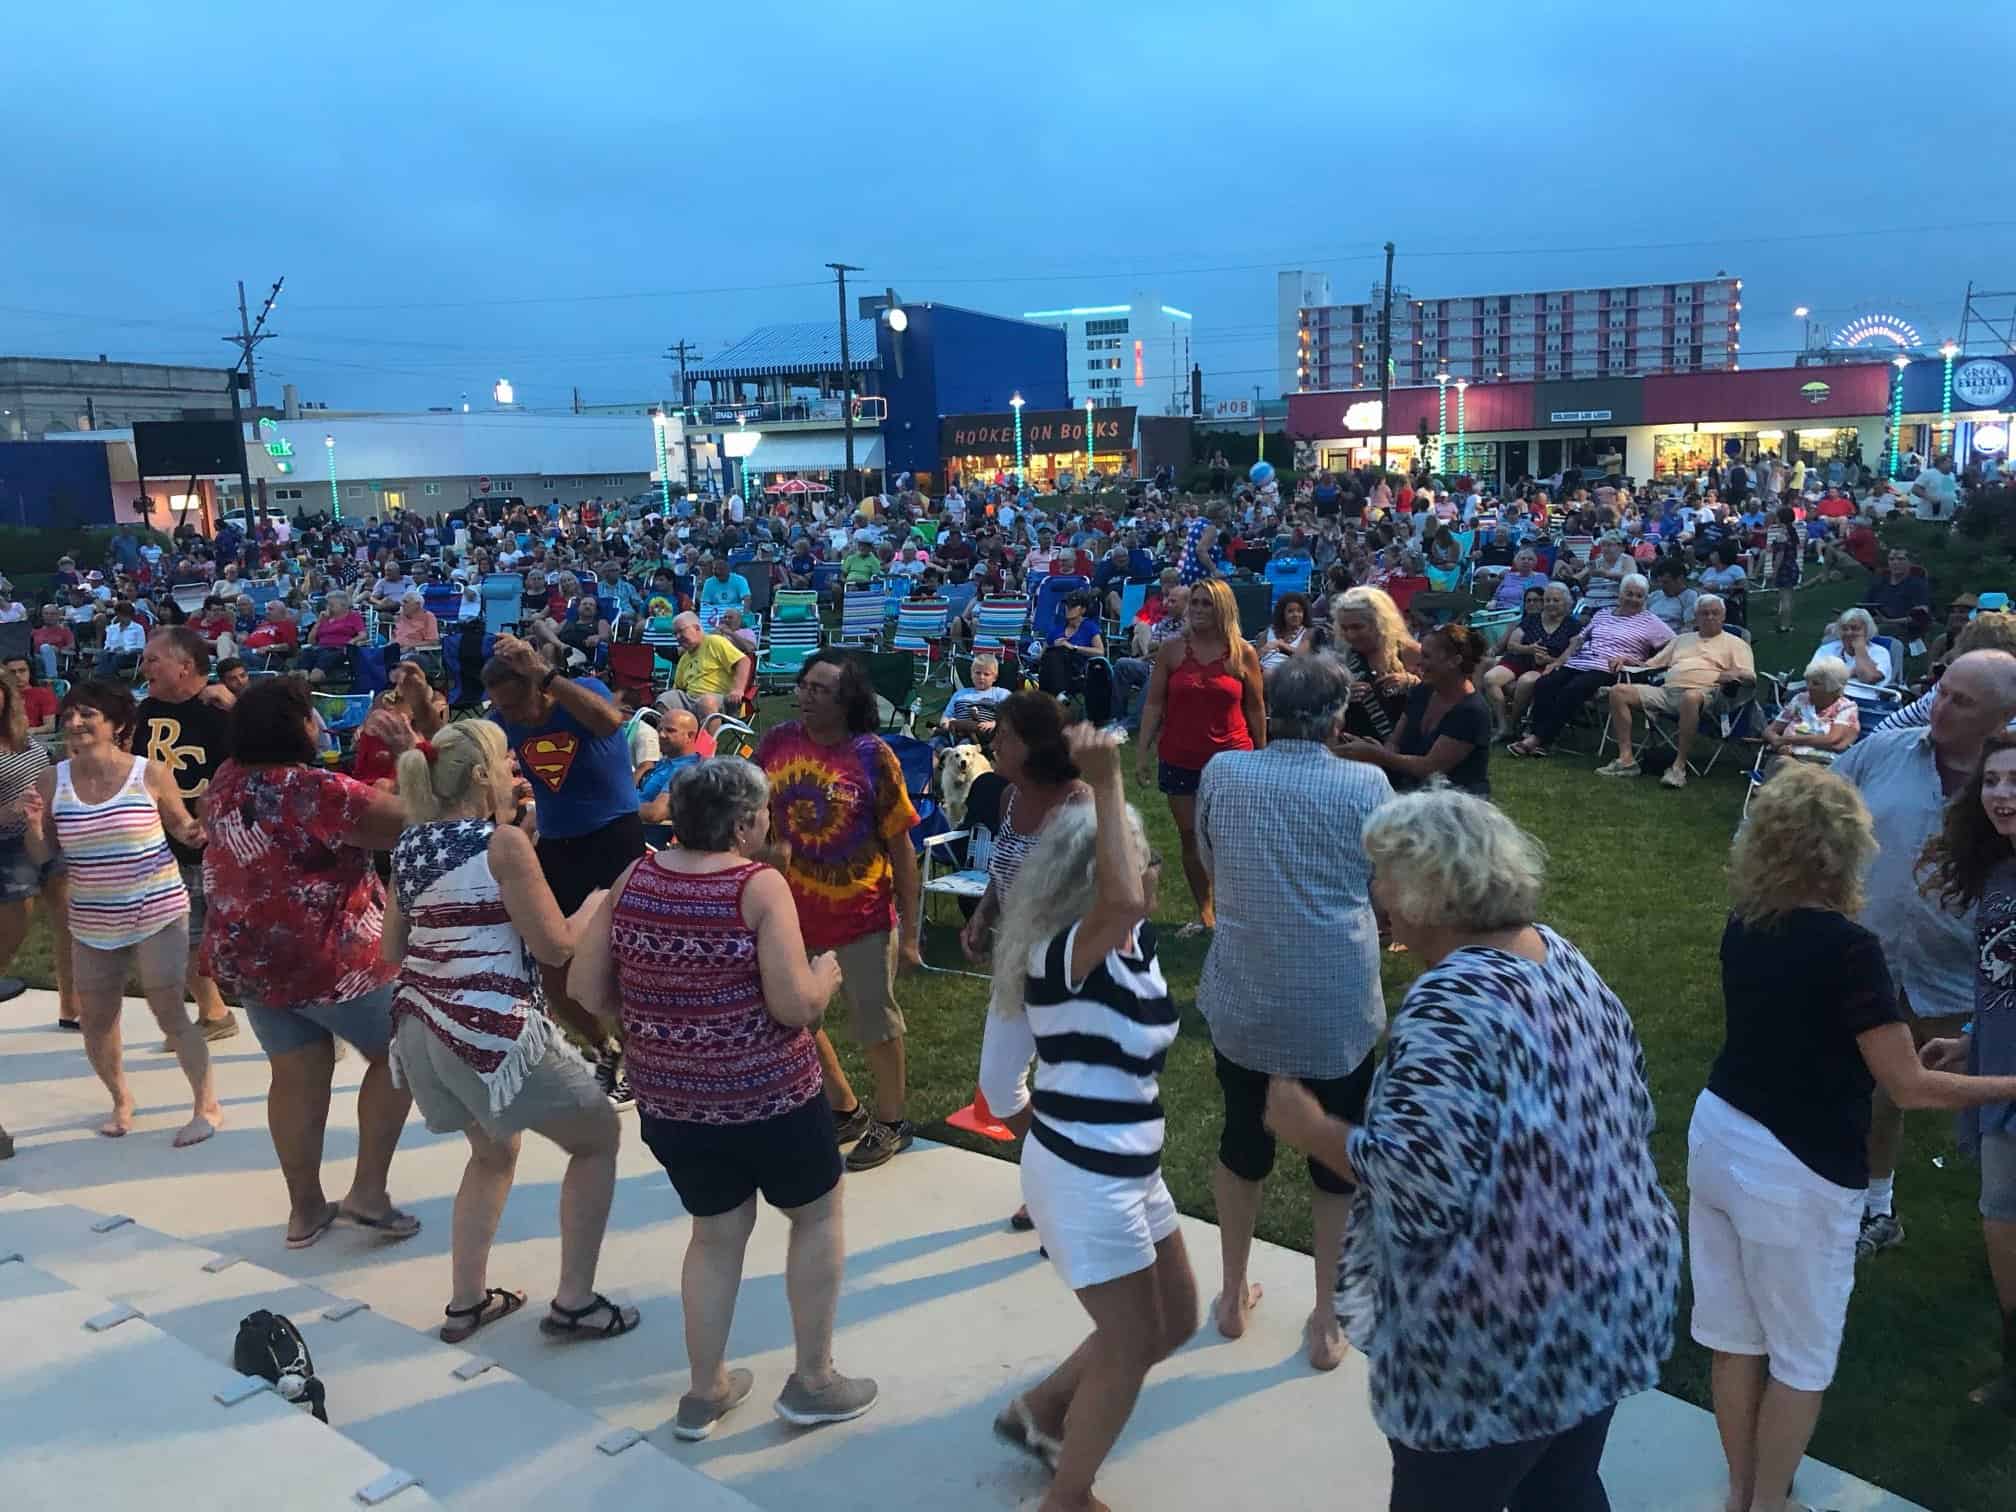 Downtown Wildwood is Rocking the Dog Days of Summer